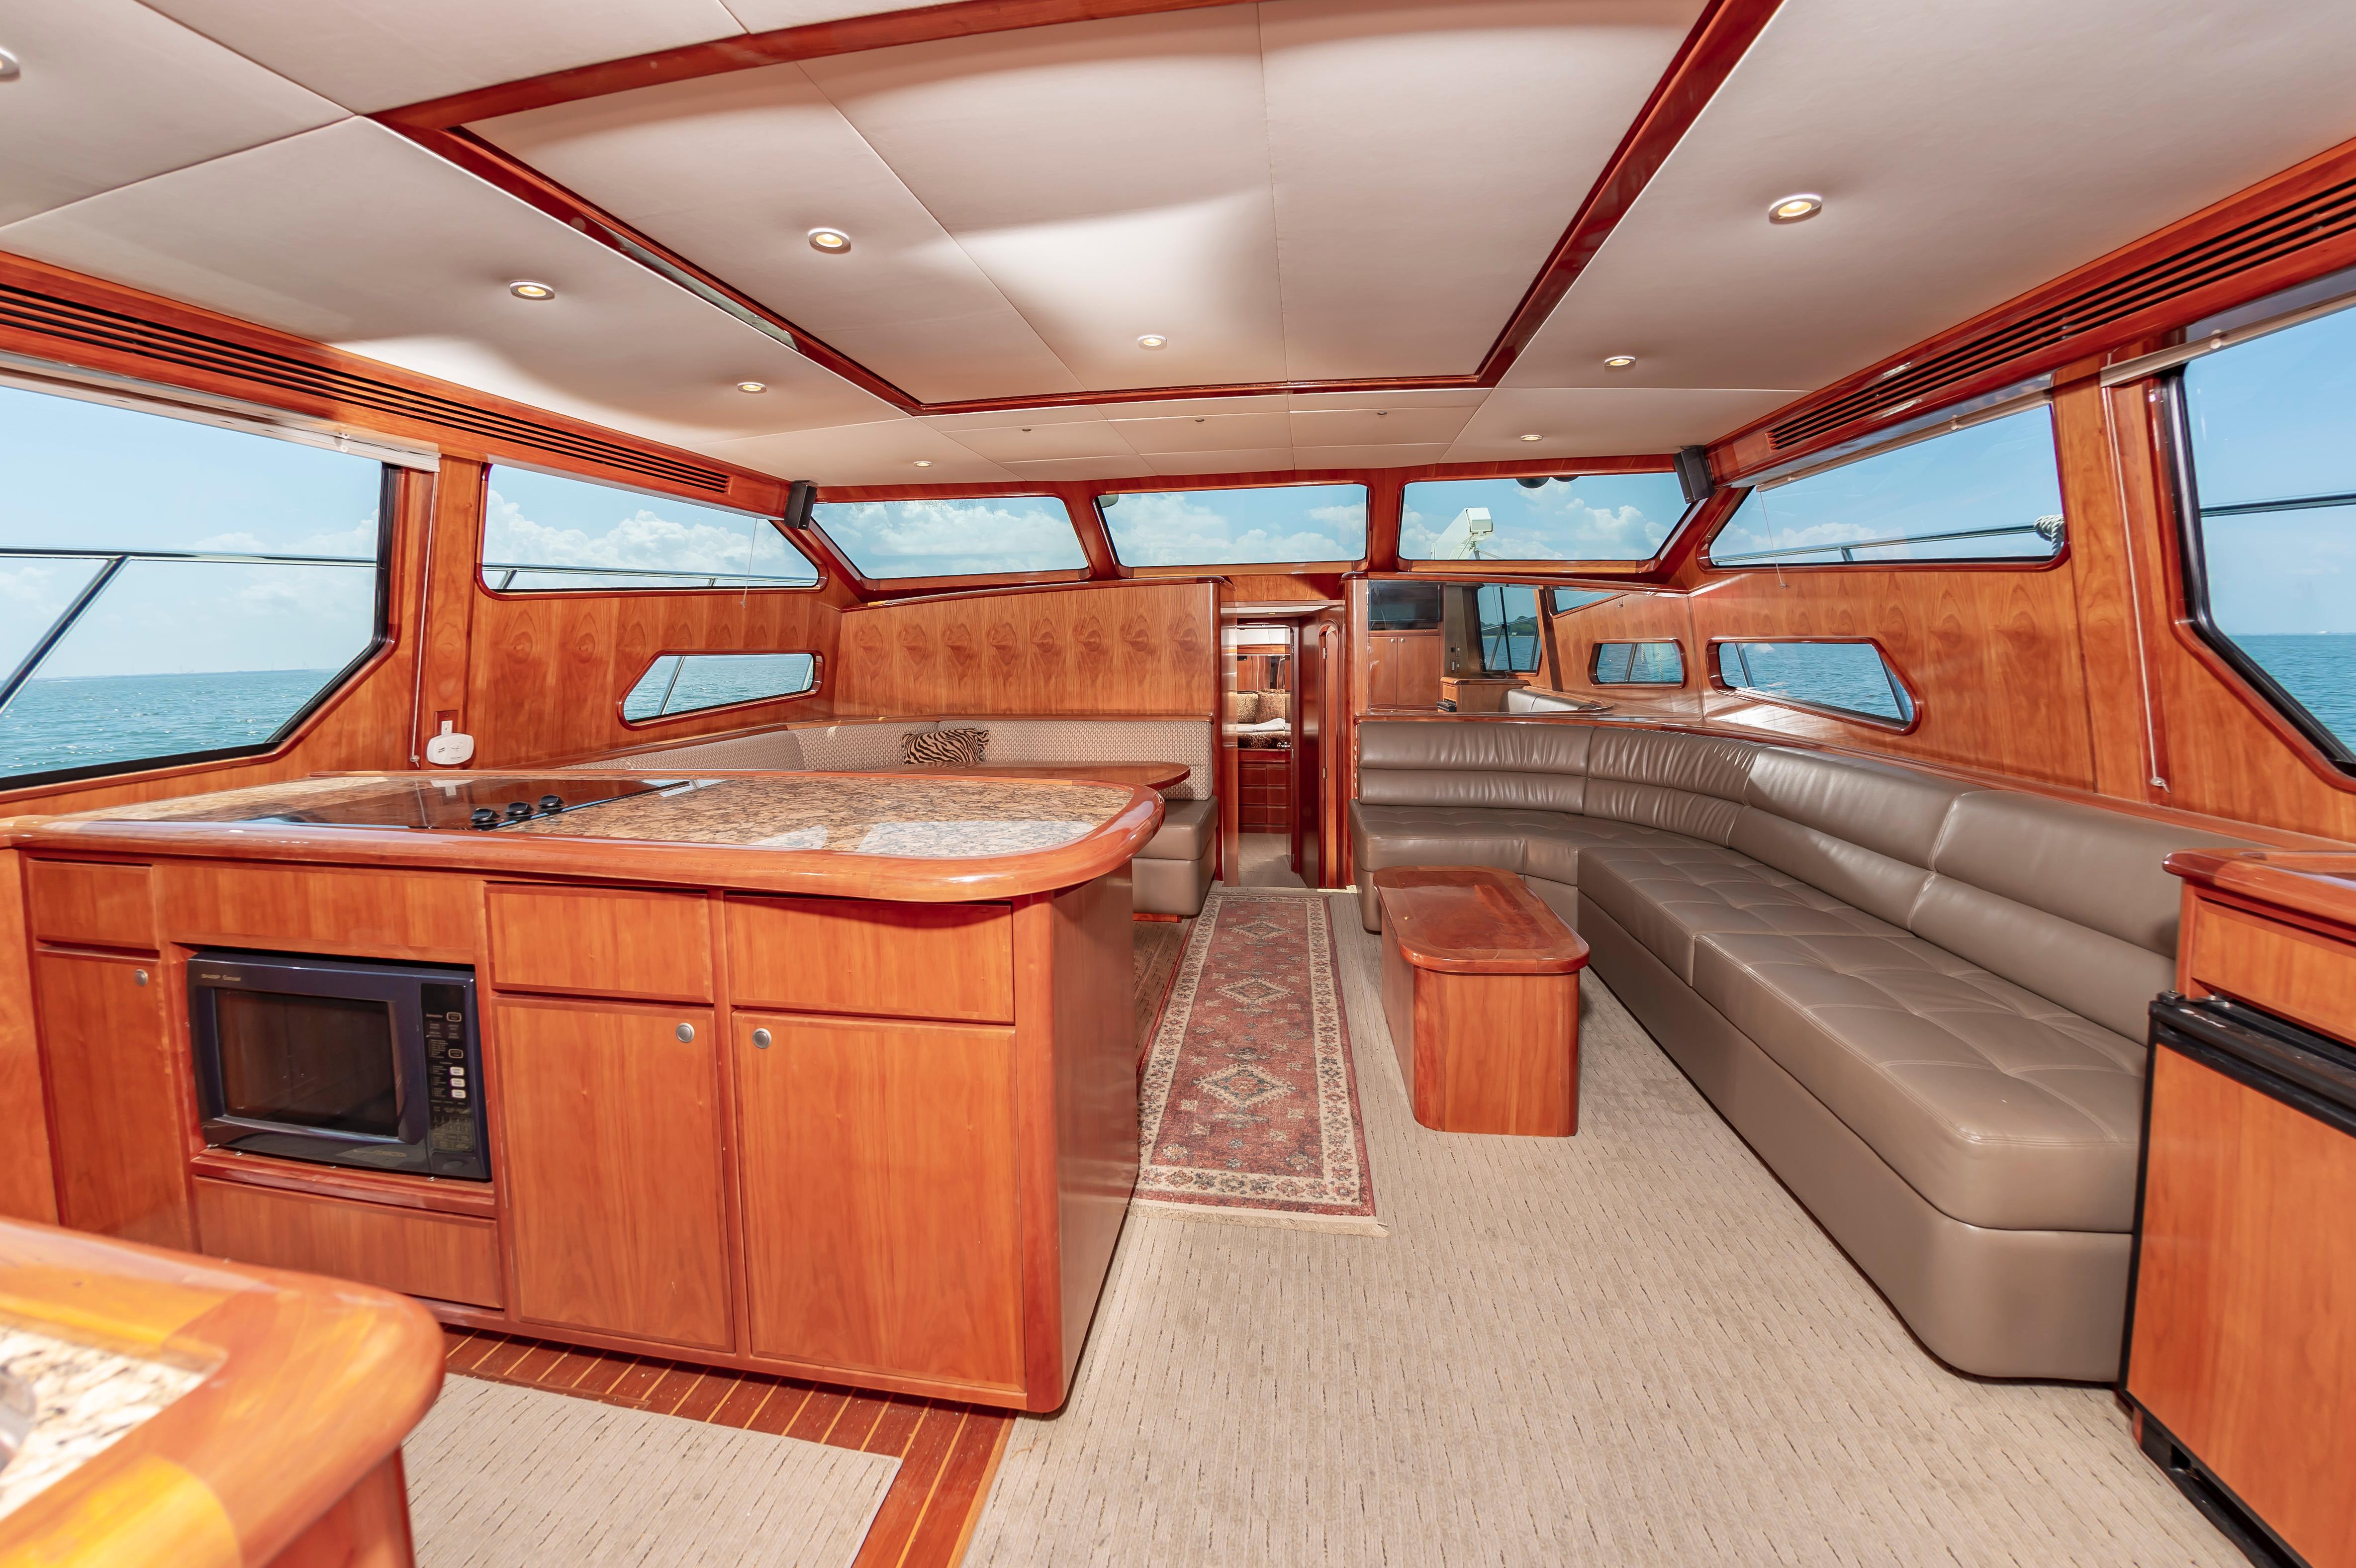 2016 Mikelson 50' S/F, Salon view from the lockable door